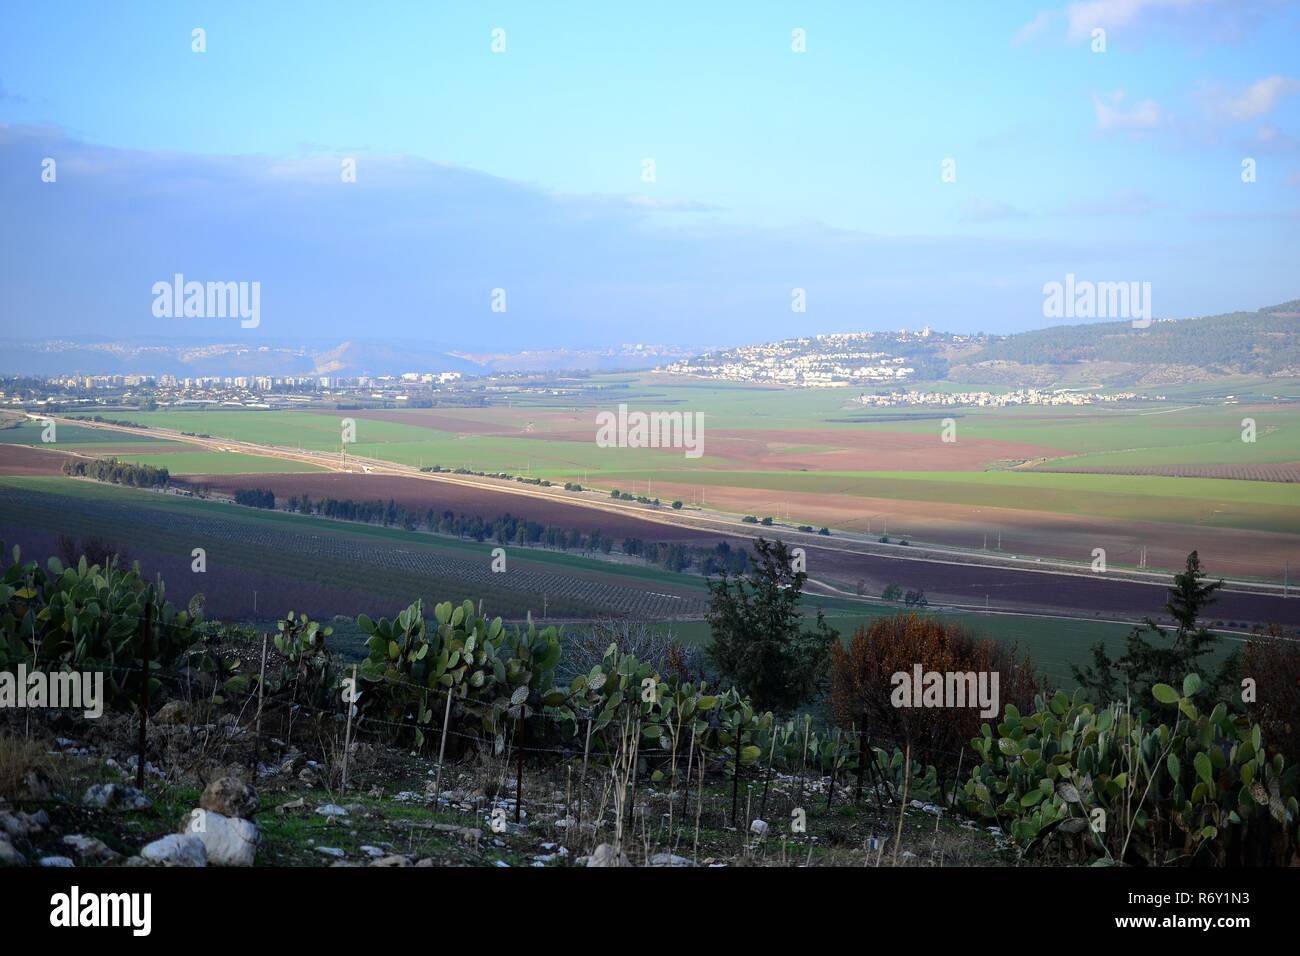 Jezreel Valley. fertile plain and inland valley south of the Lower Galilee region in Israel. Landscape Stock Photo